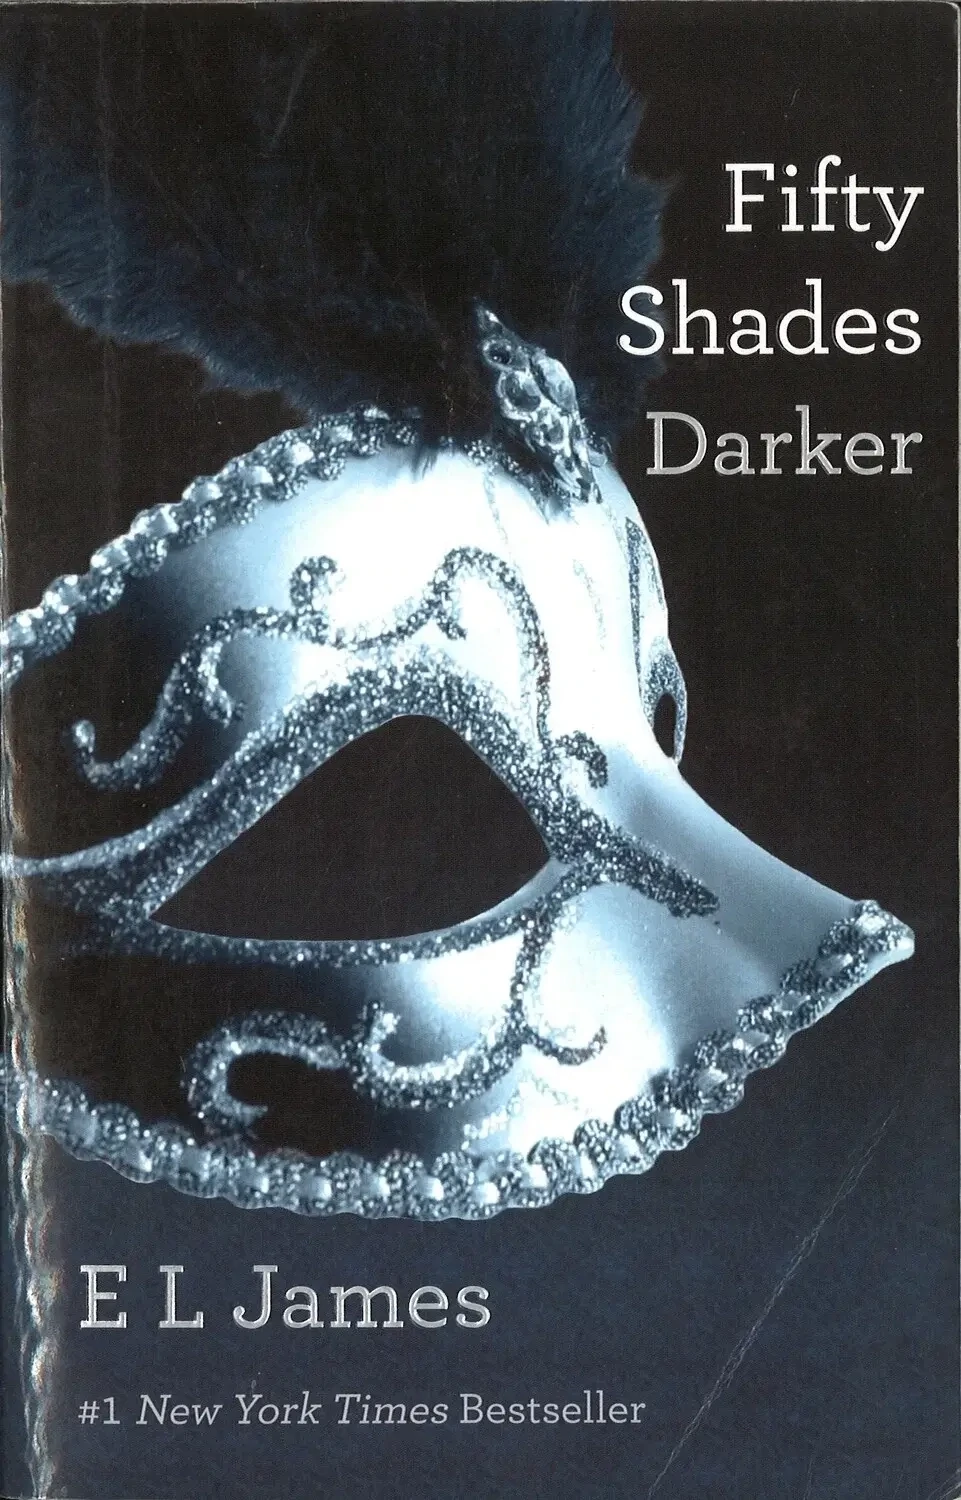 Fifty Shades Darker (Book 2 of Fifty Shades Trilogy)